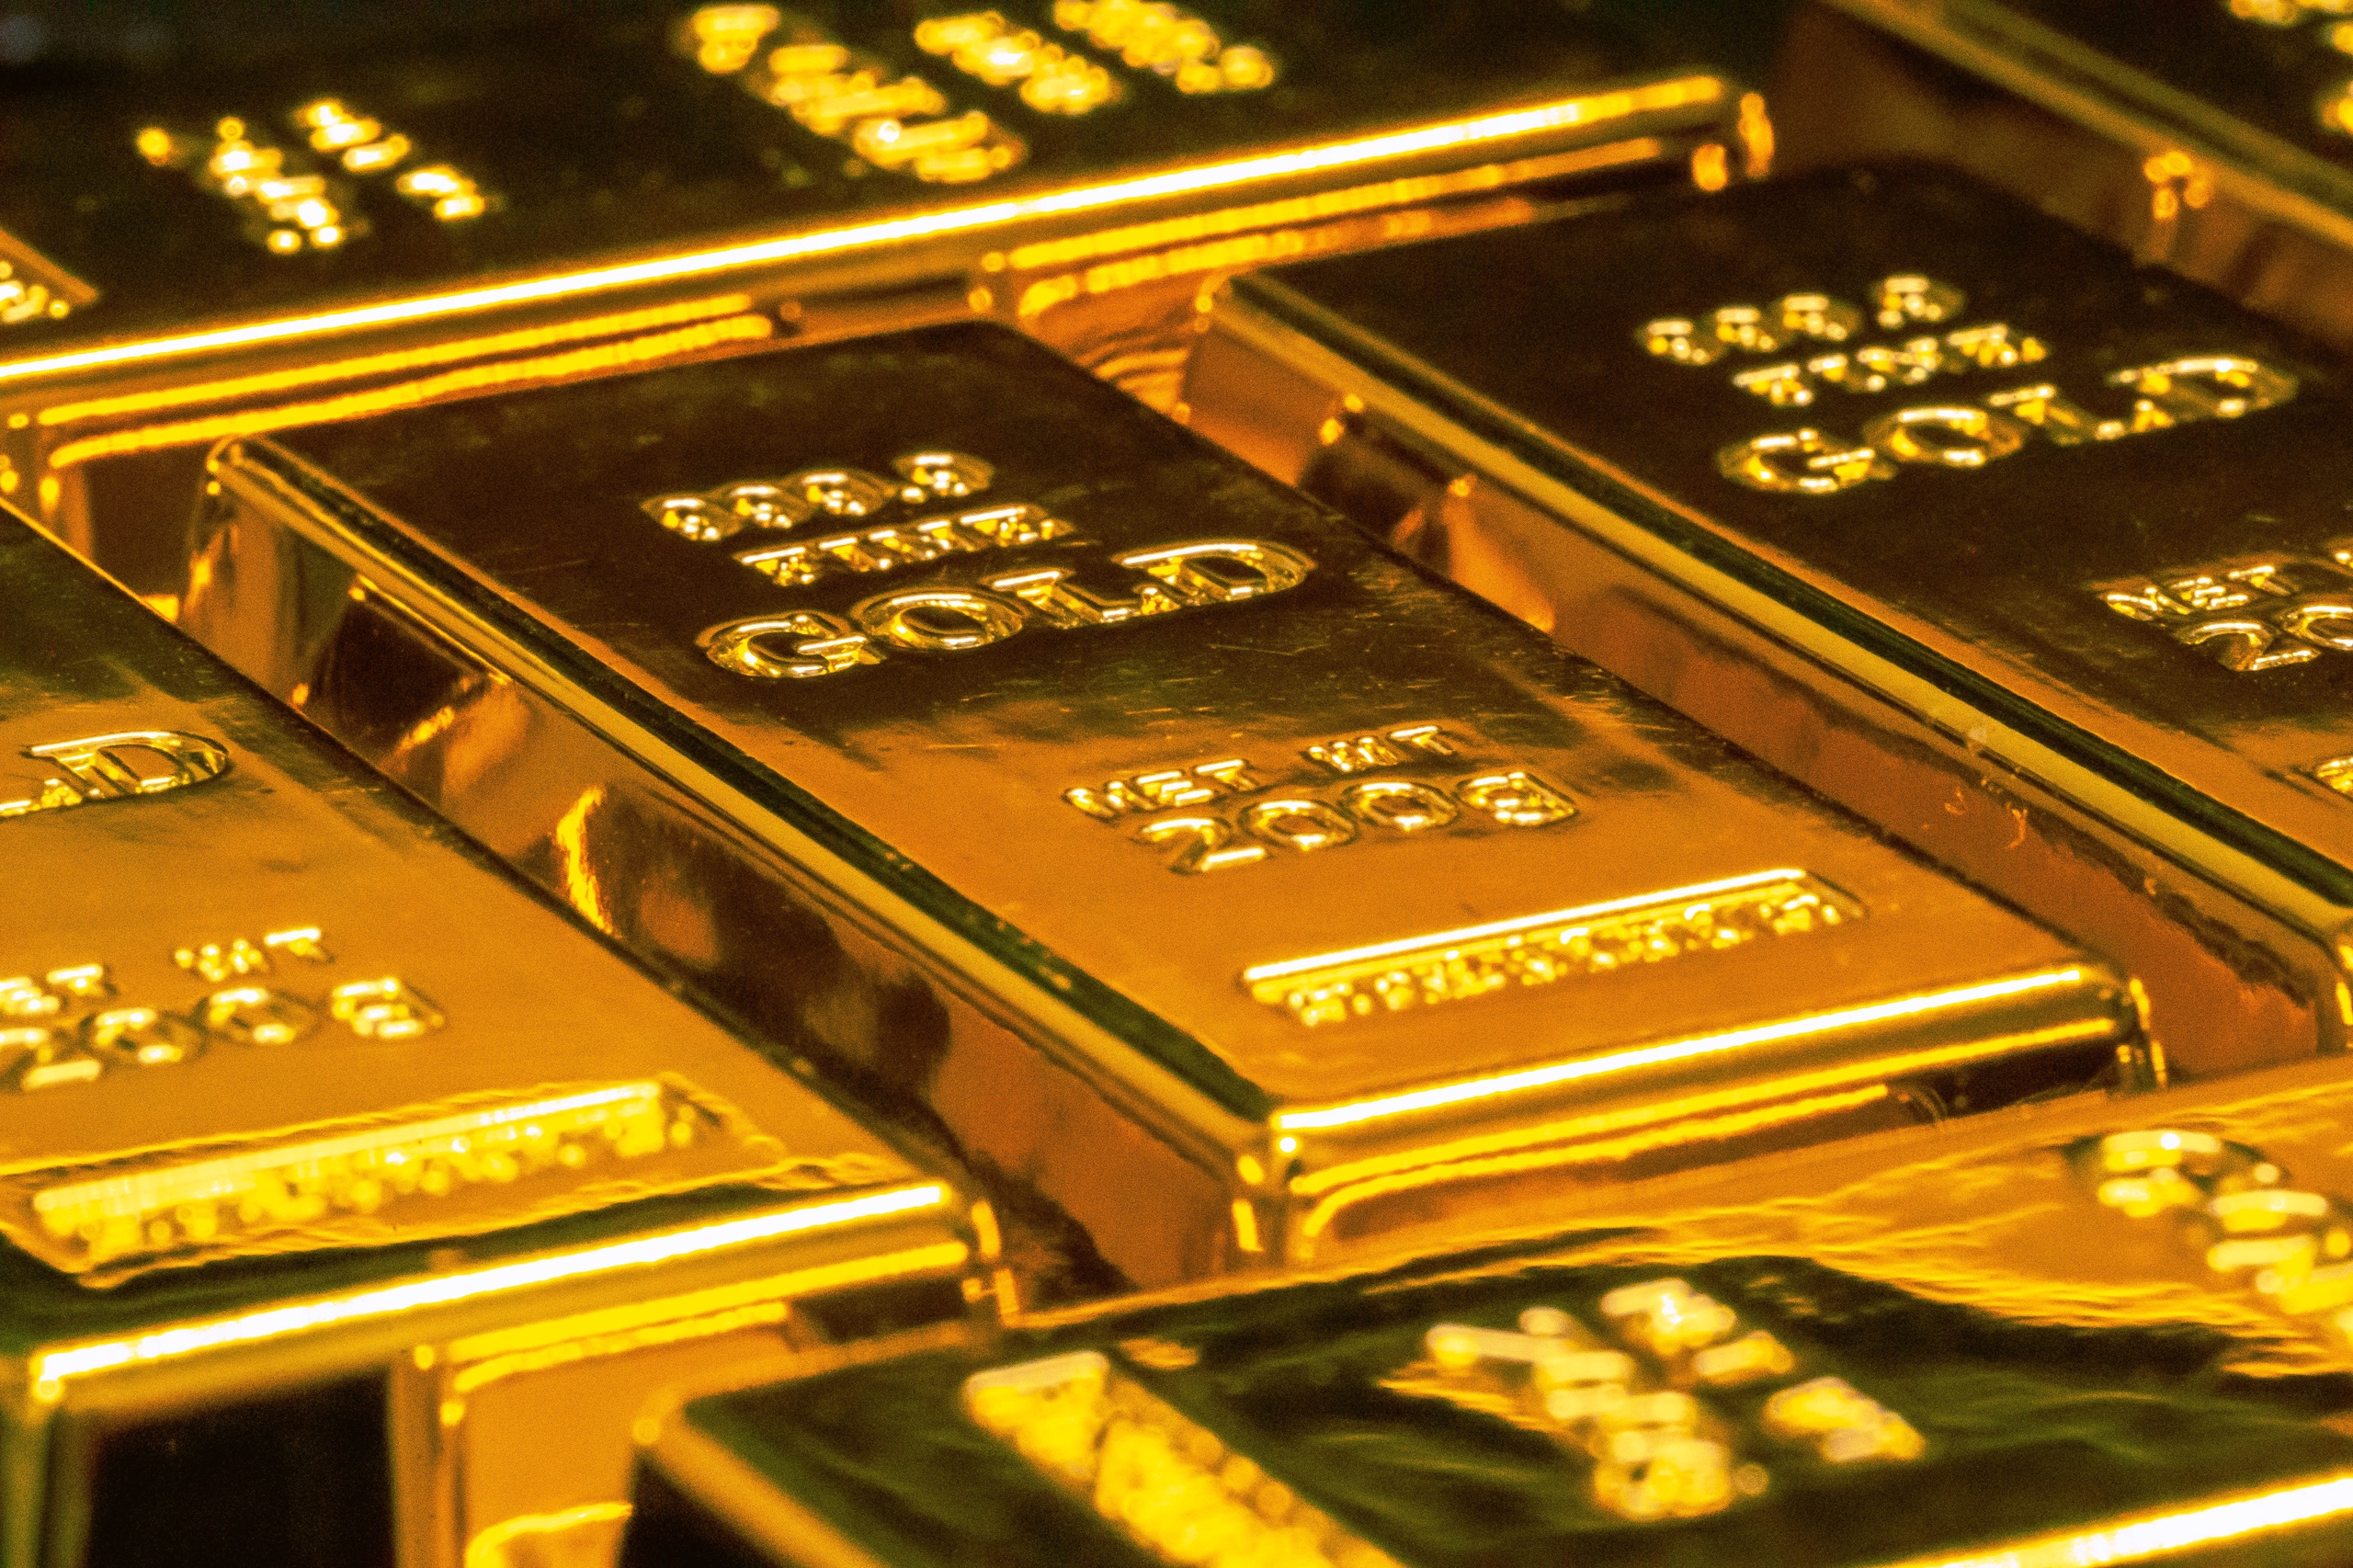 Due to the war in Ukraine, the energy crisis and the impending recession, more and more individuals and investors are turning to the gold trade as a safe haven.